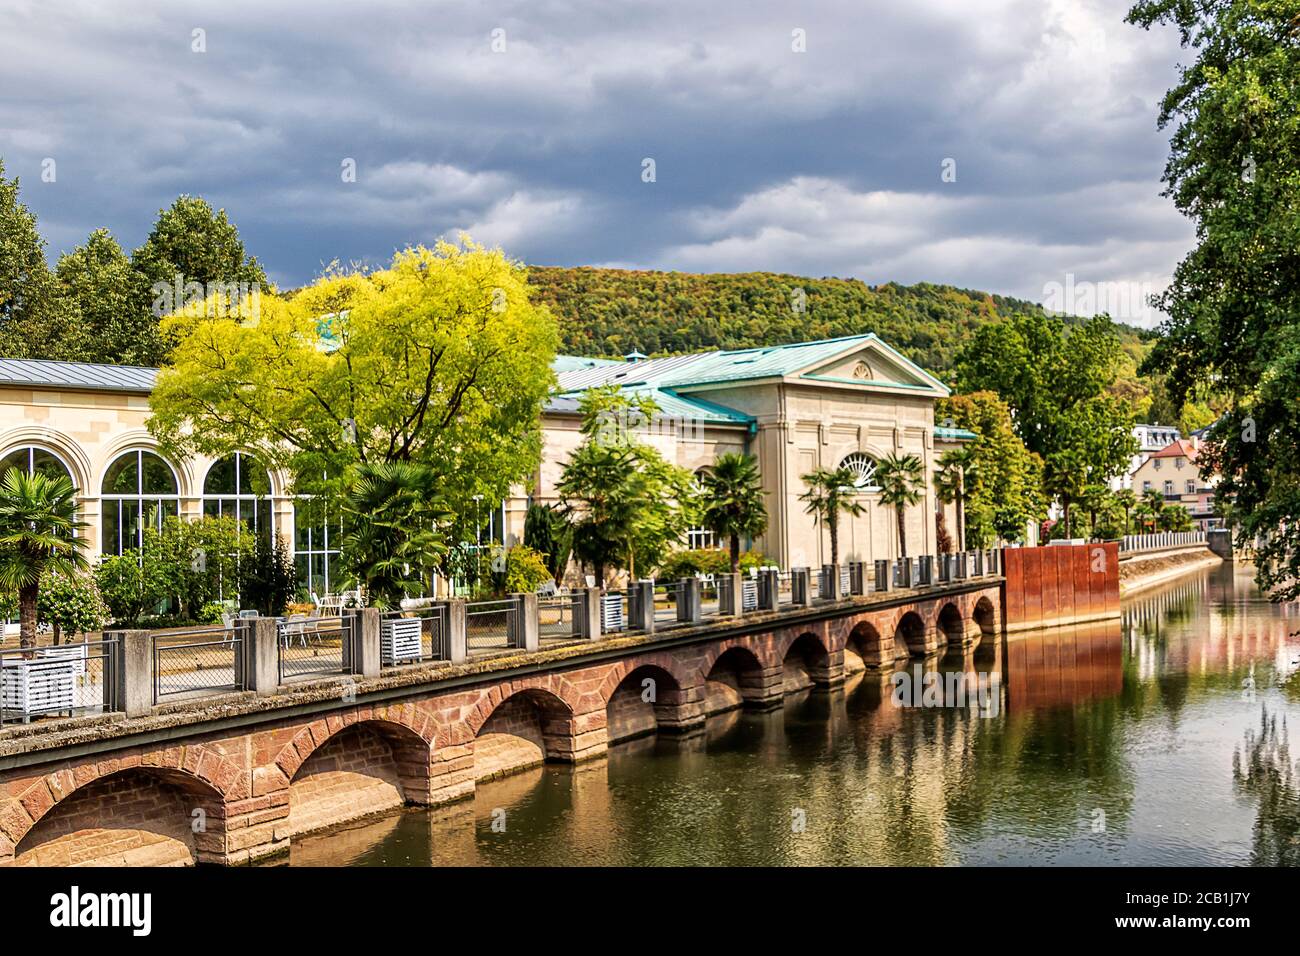 Picturesque famous spa town in Bavaria on the banks of the river Saale - Bad Kissingen, Germany Stock Photo